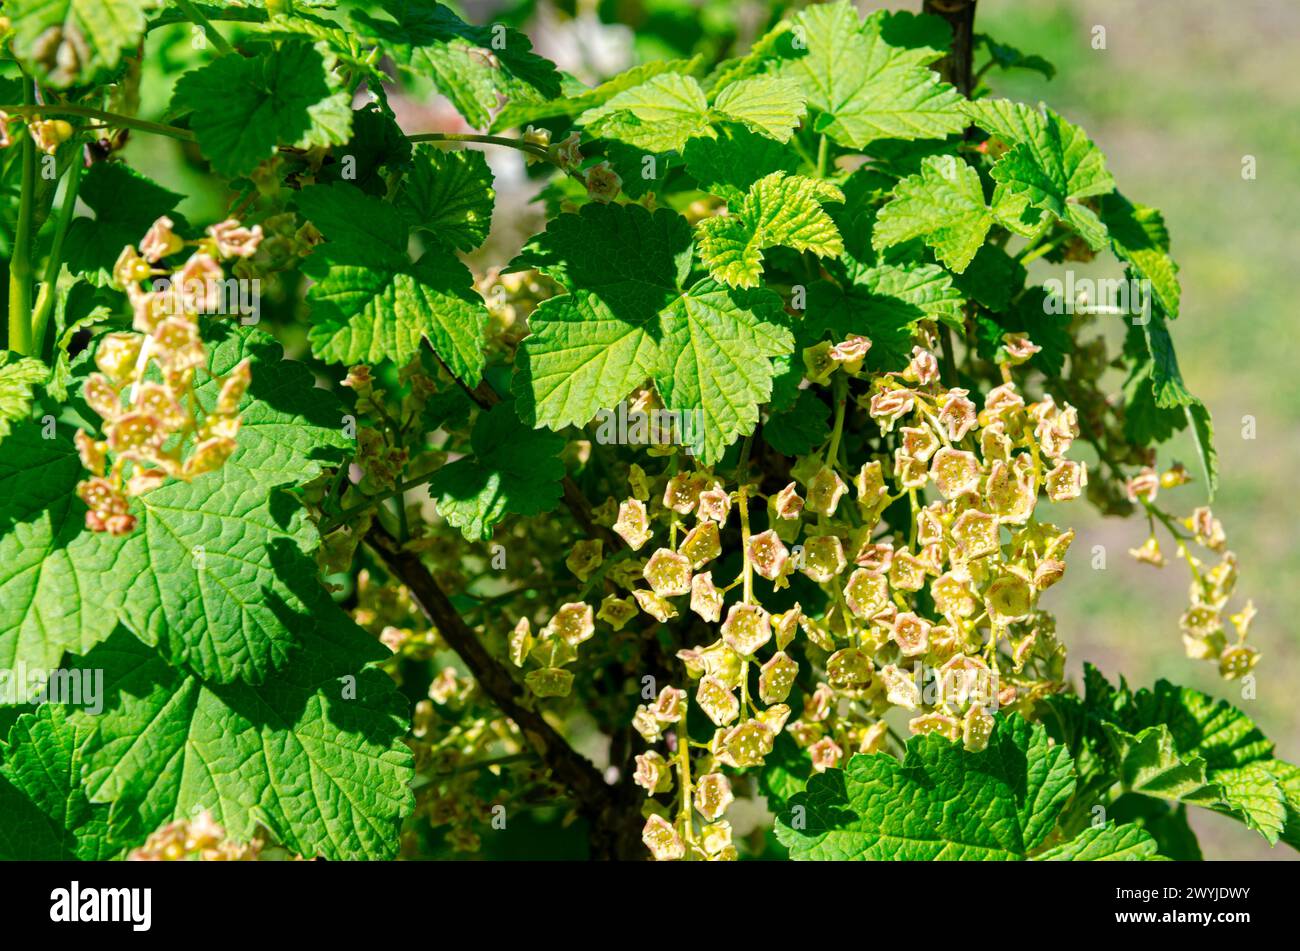 Blooming currant shrubs in orchard. Close-up view on branch with flowers, blurred background. Sunny spring day picture. Stock Photo